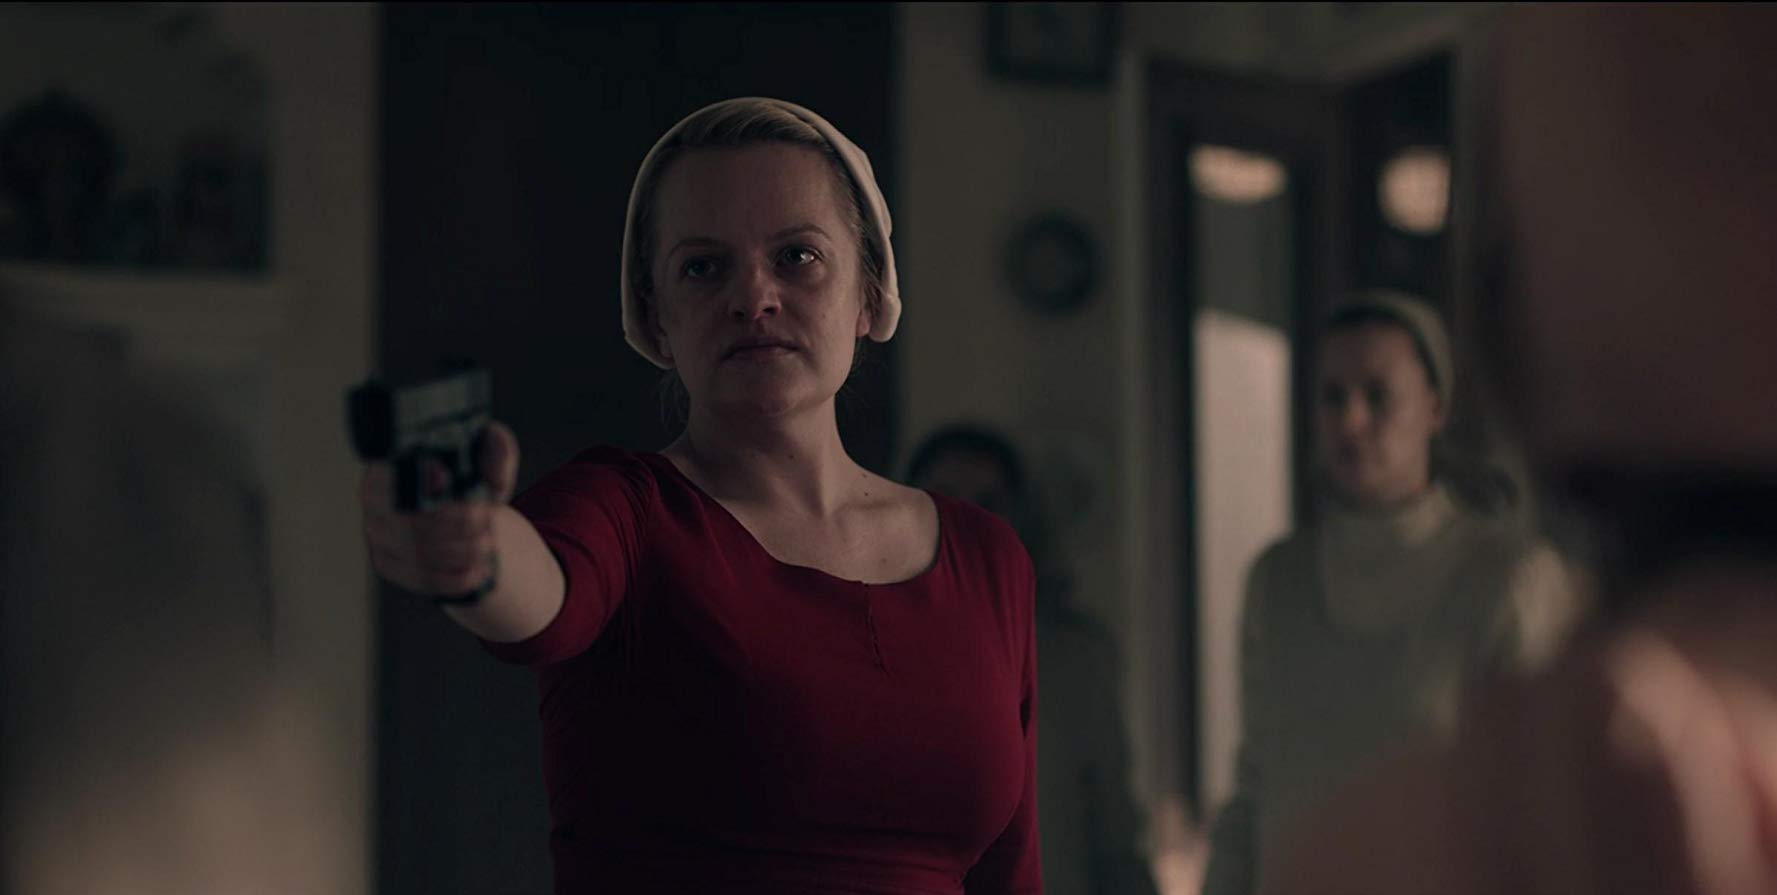 ‘the handmaid’s tale’ takes us on an emotional rollercoaster ride with what might be its most satisfying episode yet